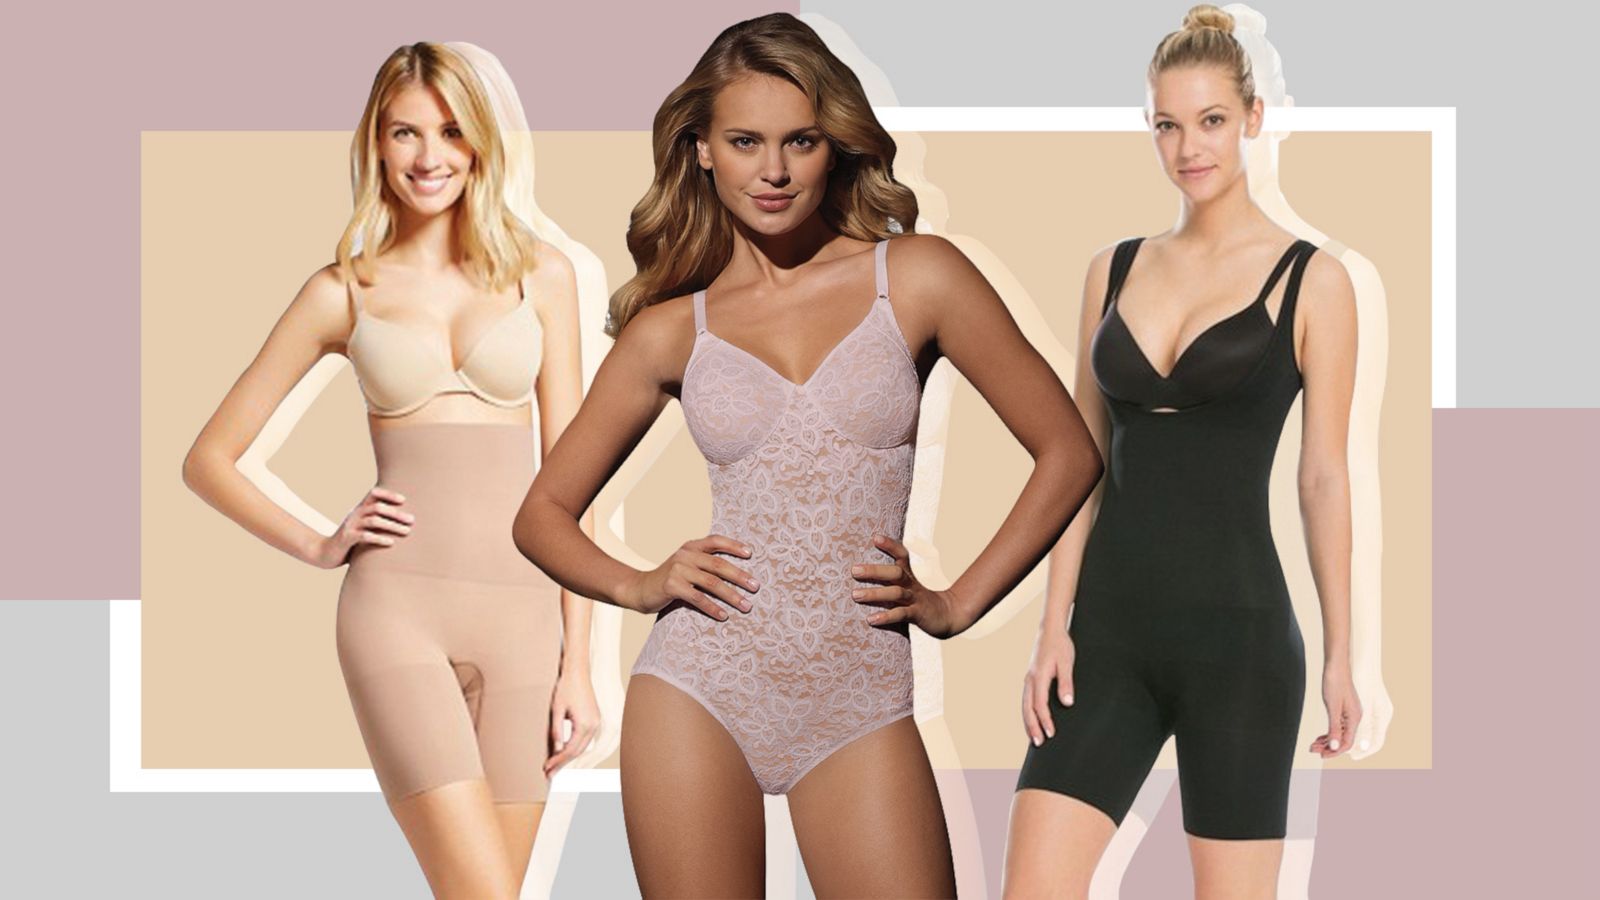 GQF shapewear is here to make you feel confident in every moment!#body